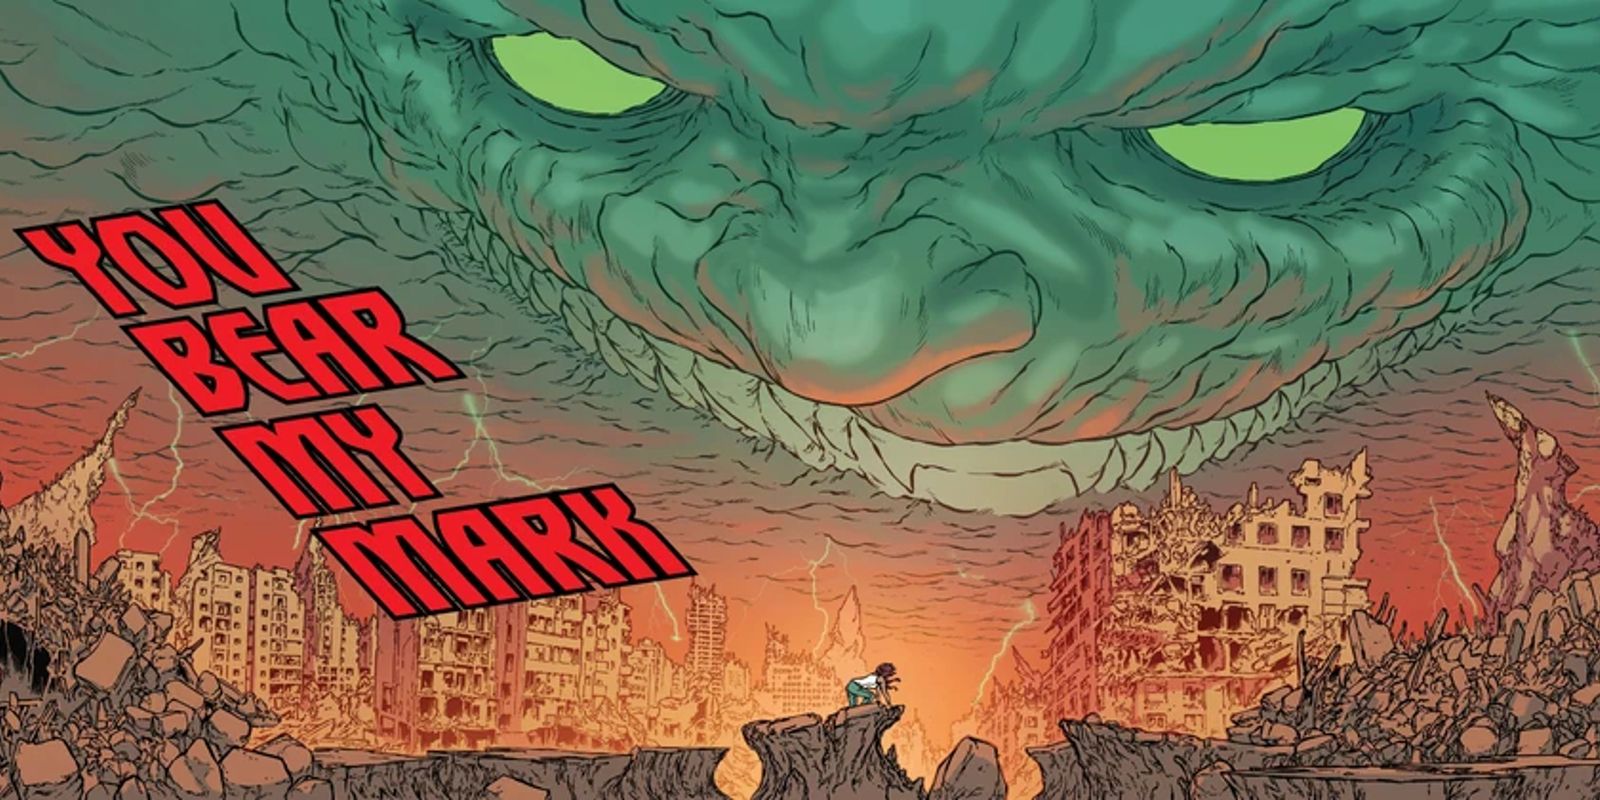 The One Below All of Marvel Comics encompassing the entire sky in Immortal Hulk